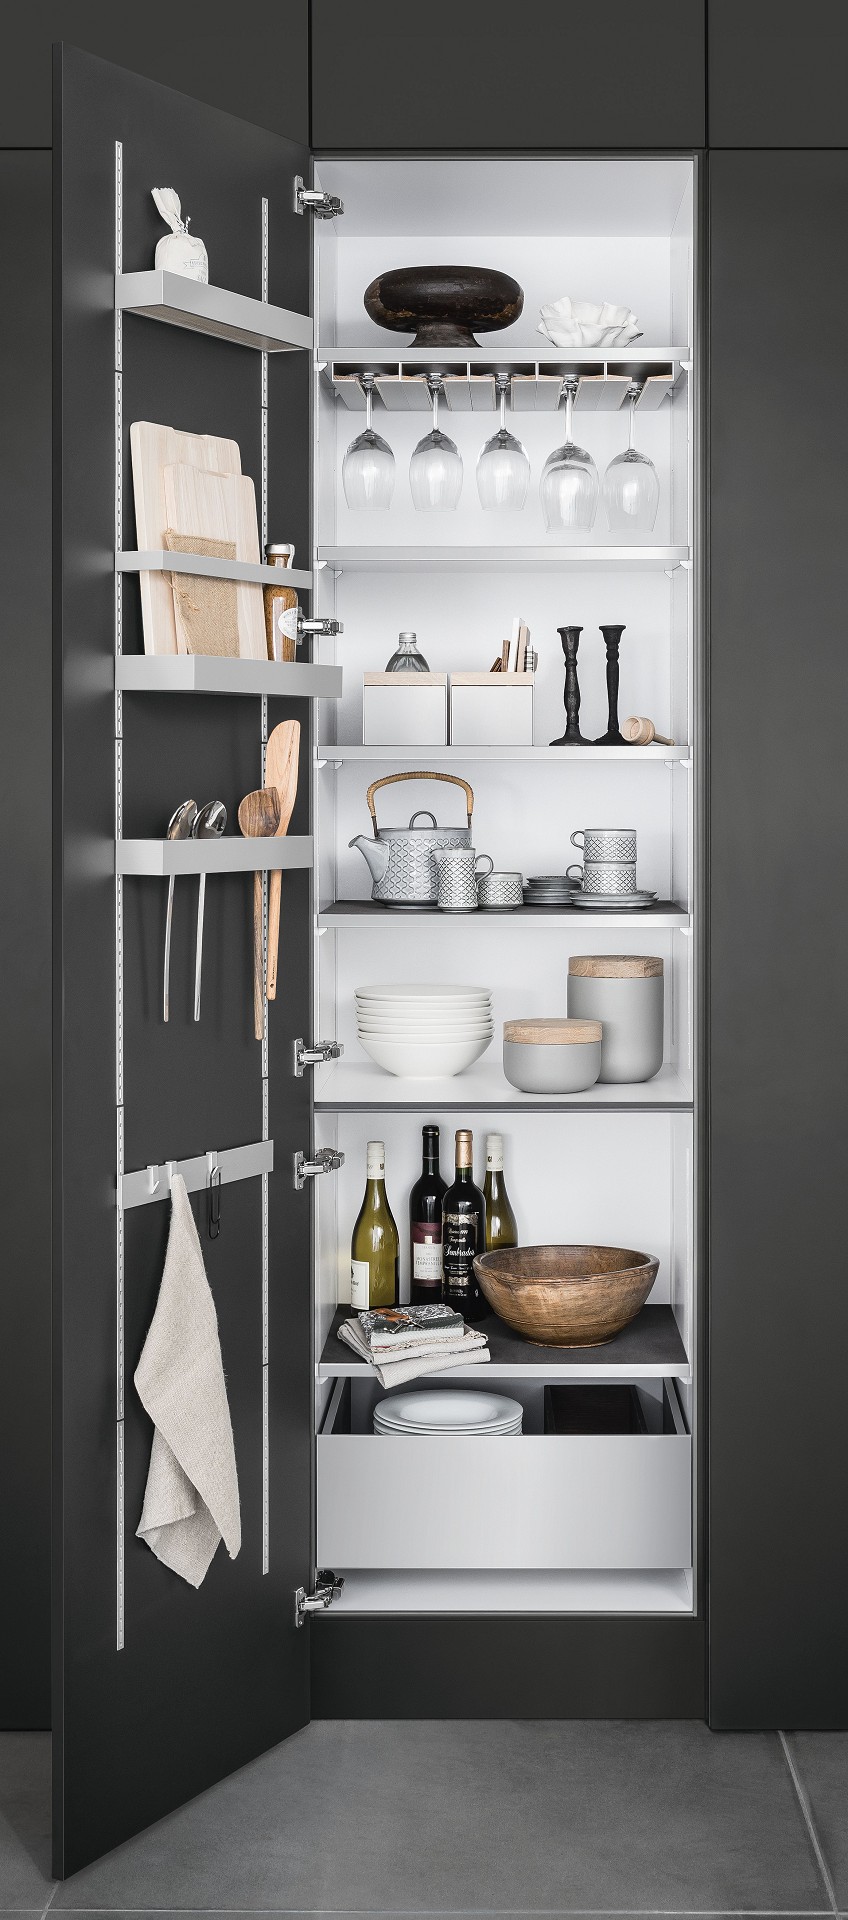 SieMatic MultiMatic interior organization system for cabinets offers more storage space for the kitchen.